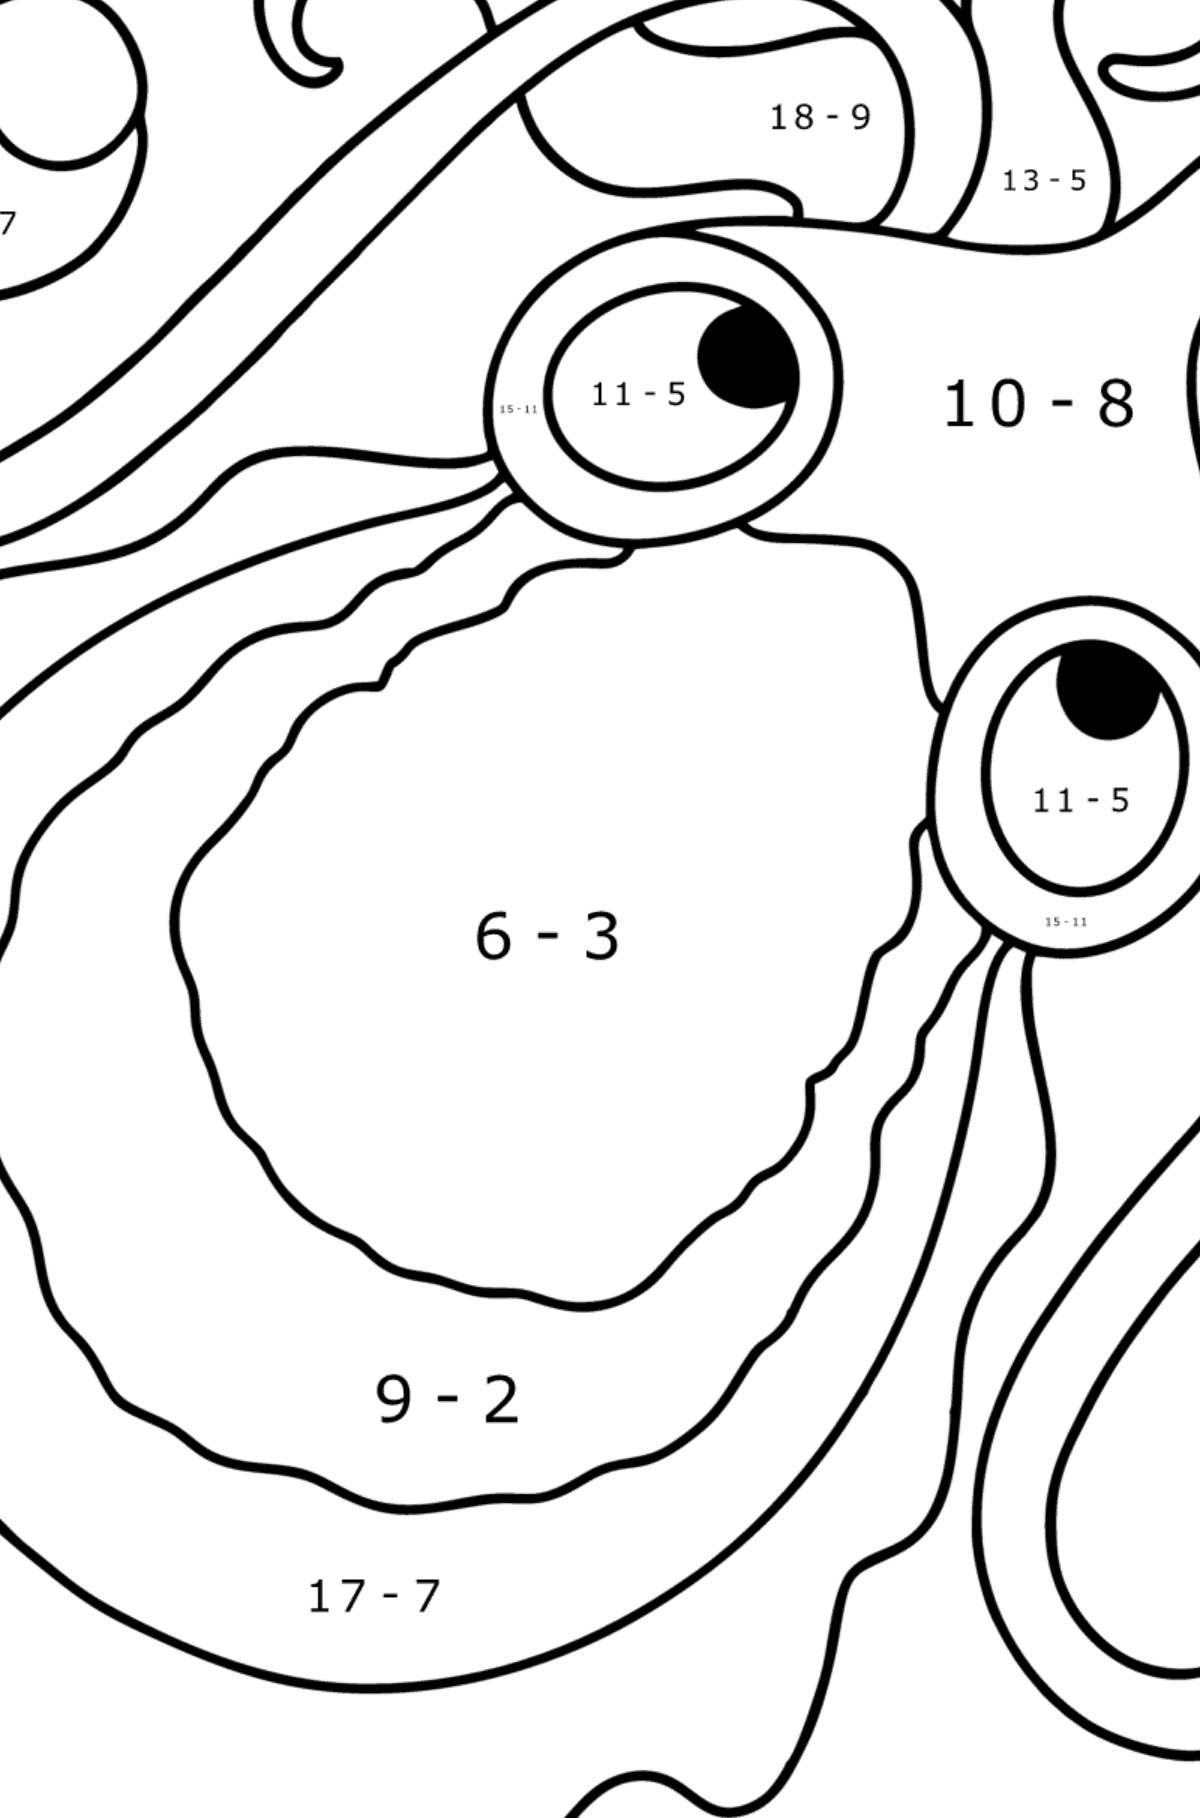 Cuttlefish coloring page - Math Coloring - Subtraction for Kids